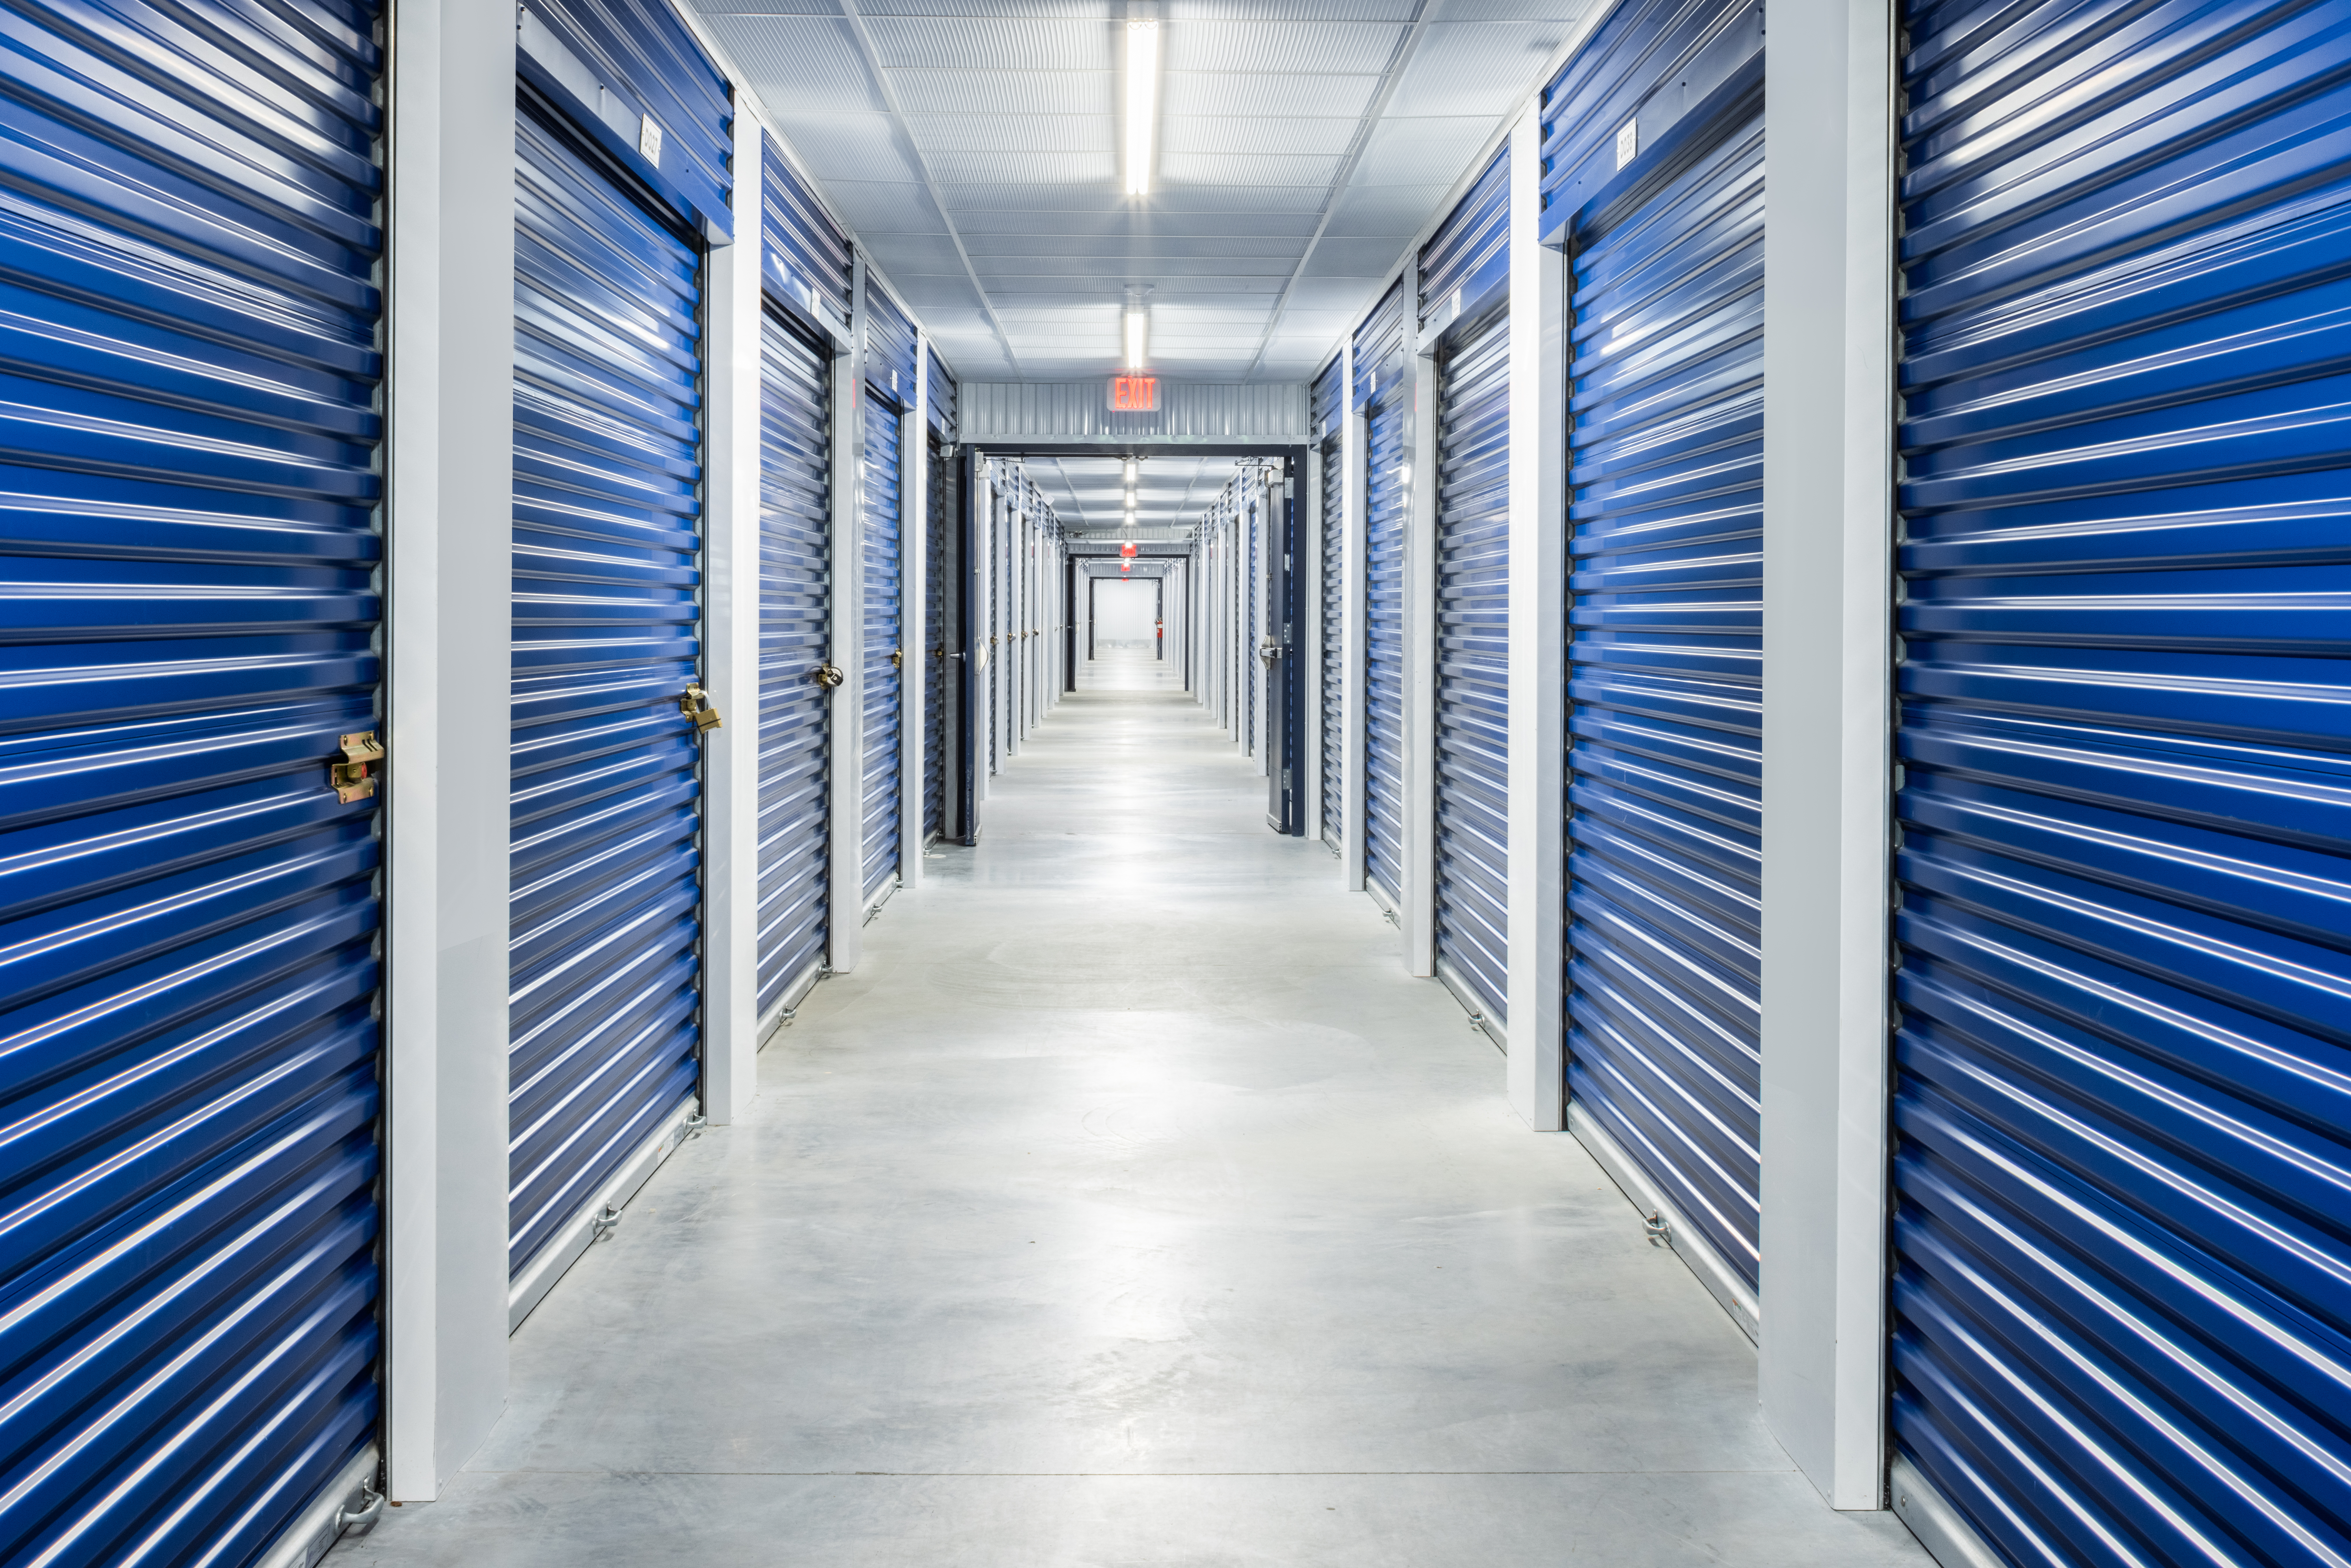 Hallway of climate controlled self storage units at Prime Storage.